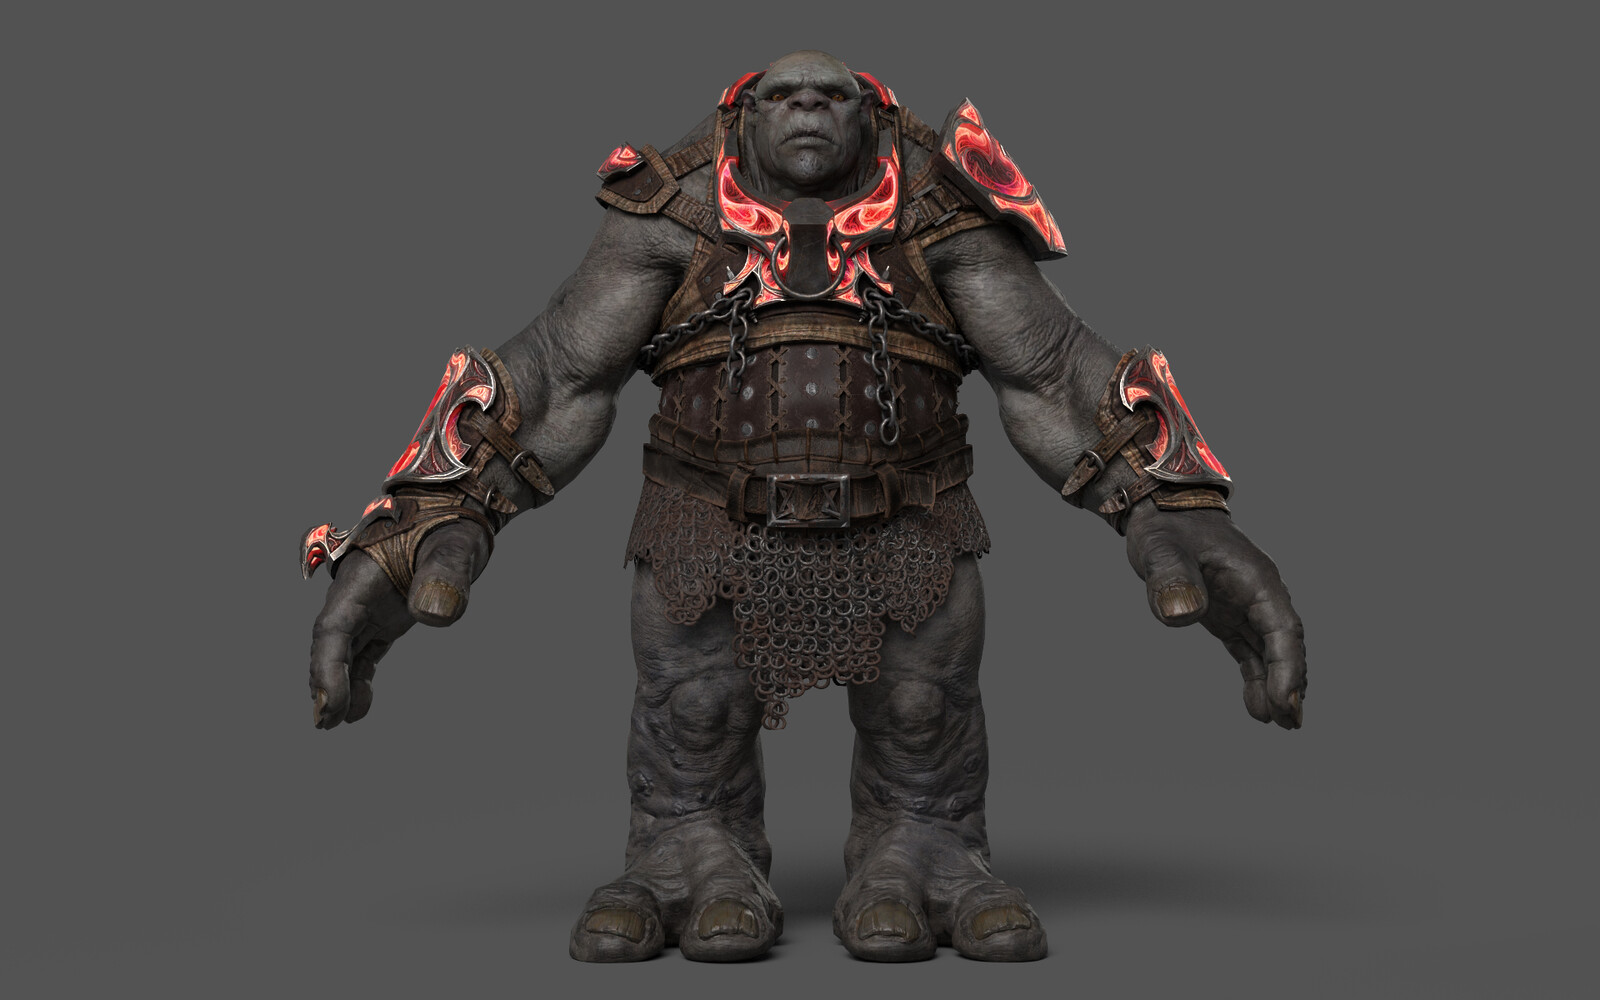 I copied what Dallin Jones had done for the goblin forearm armor onto this Troll armor. Linking the two a bit more. 